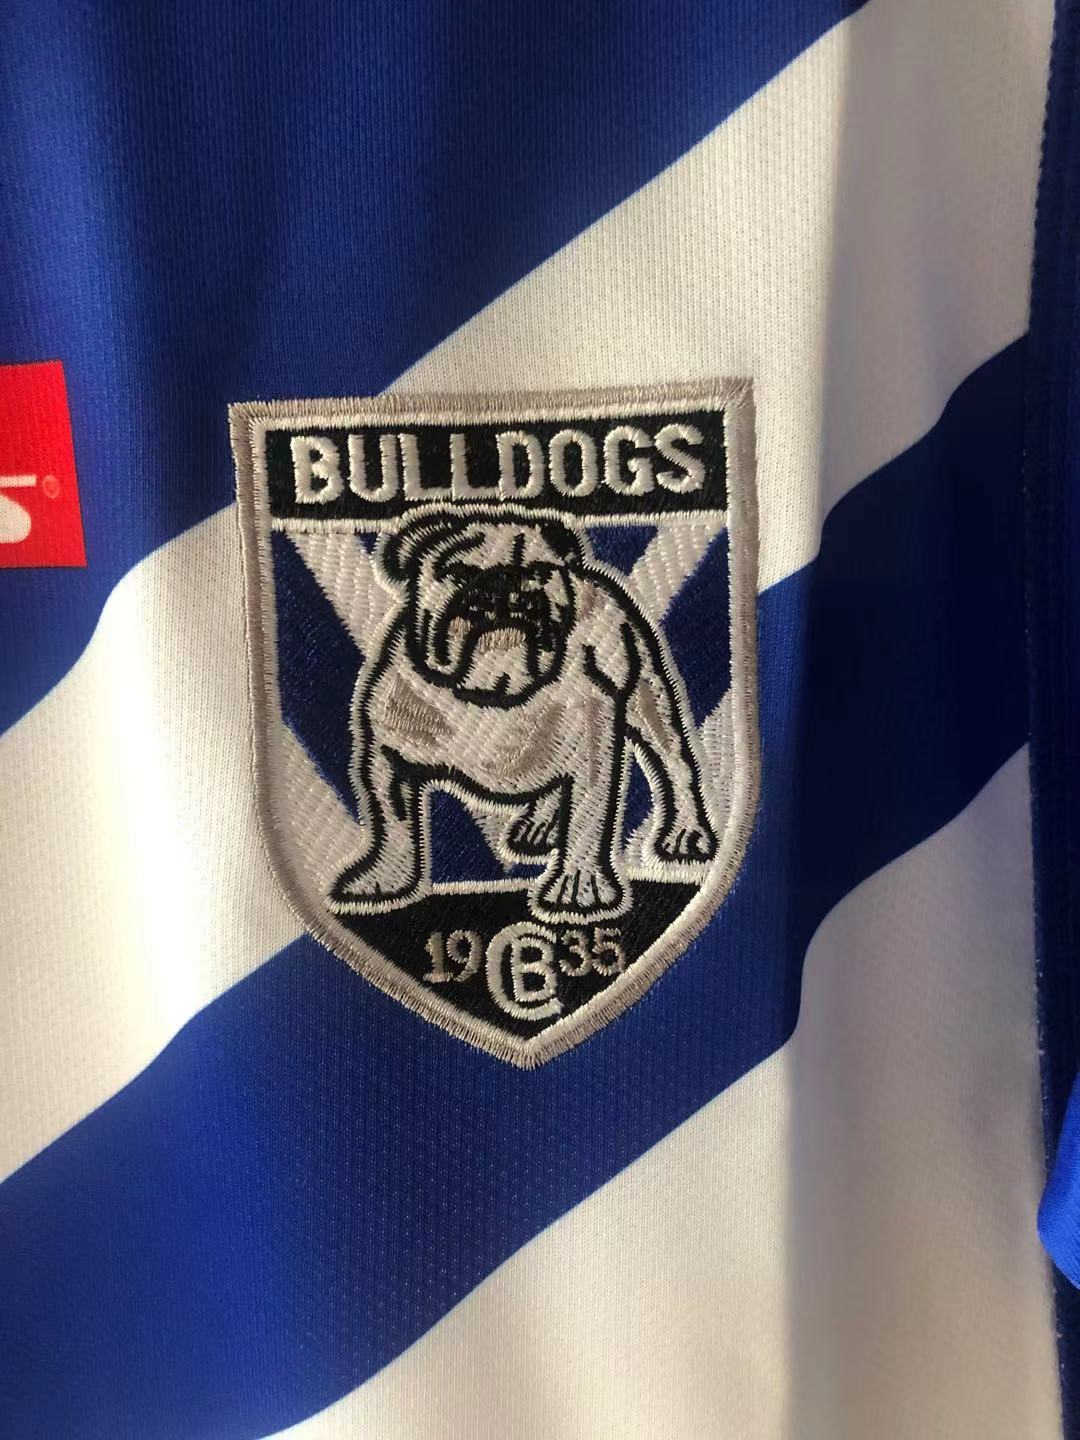 2021 Canterbury-Bankstown Bulldogs Home Rugby Soccer Jersey Replica  Mens